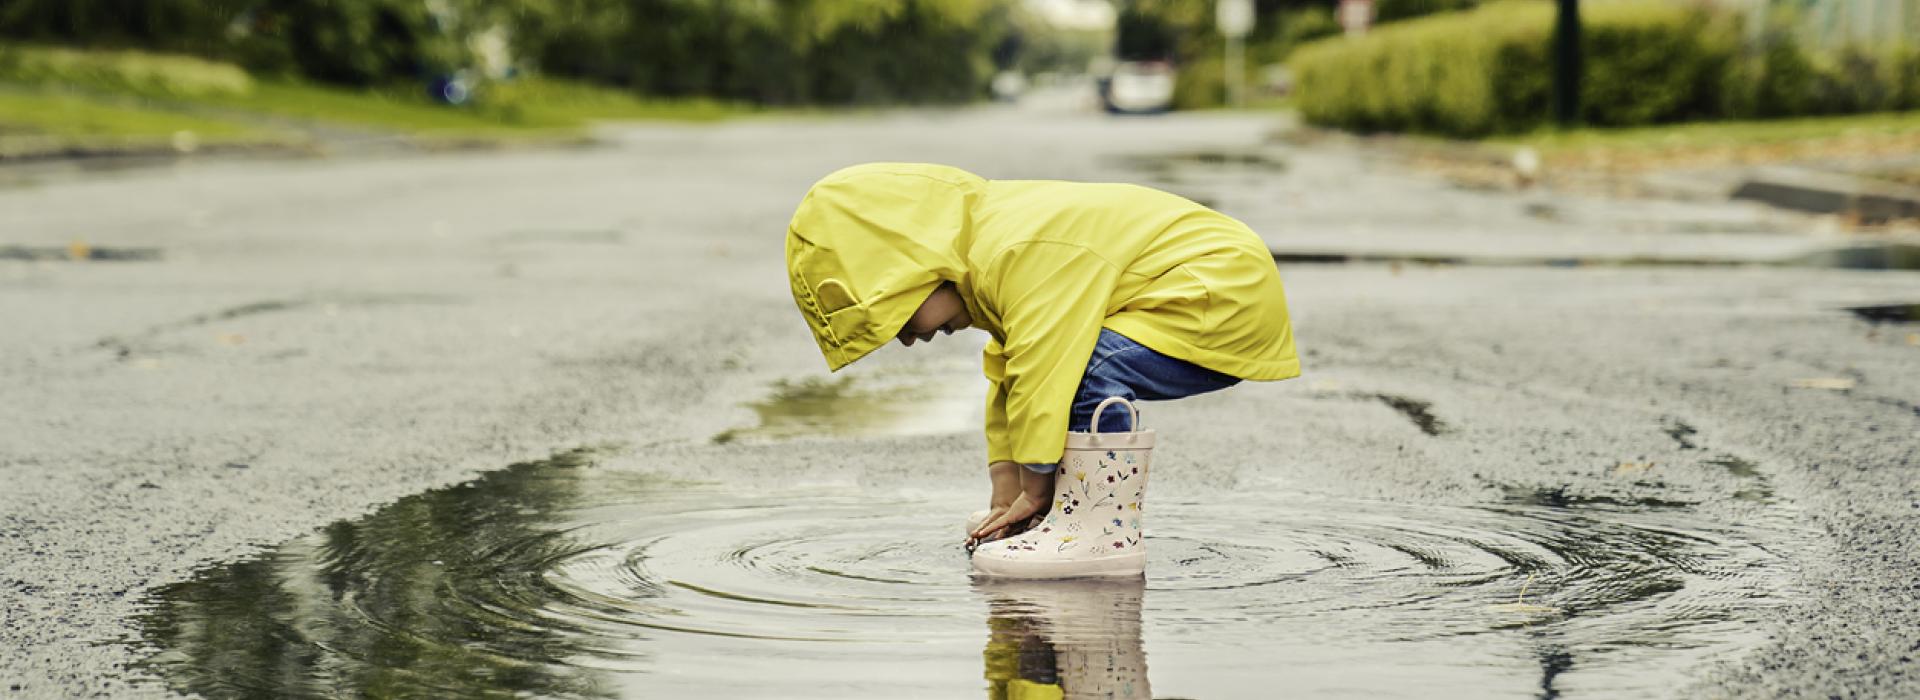 Boy playing in puddle